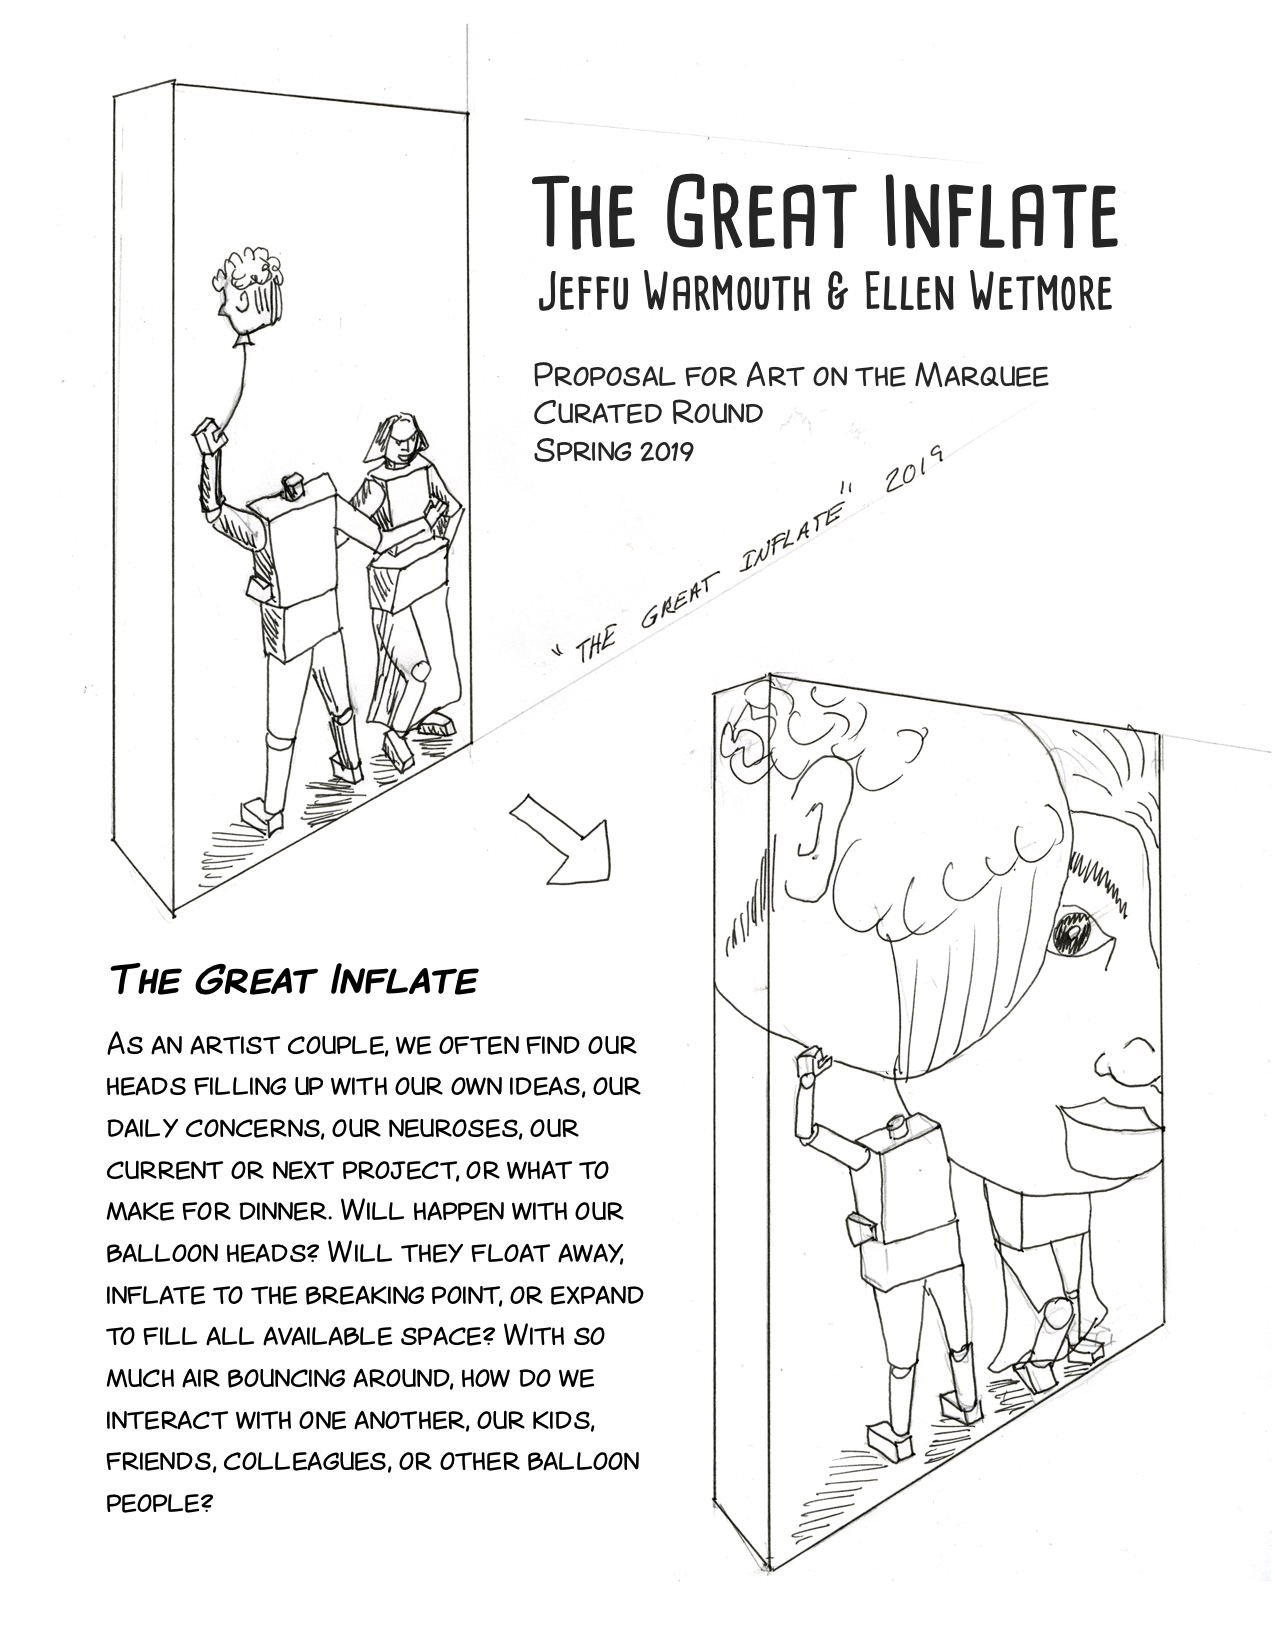 The Great Inflate